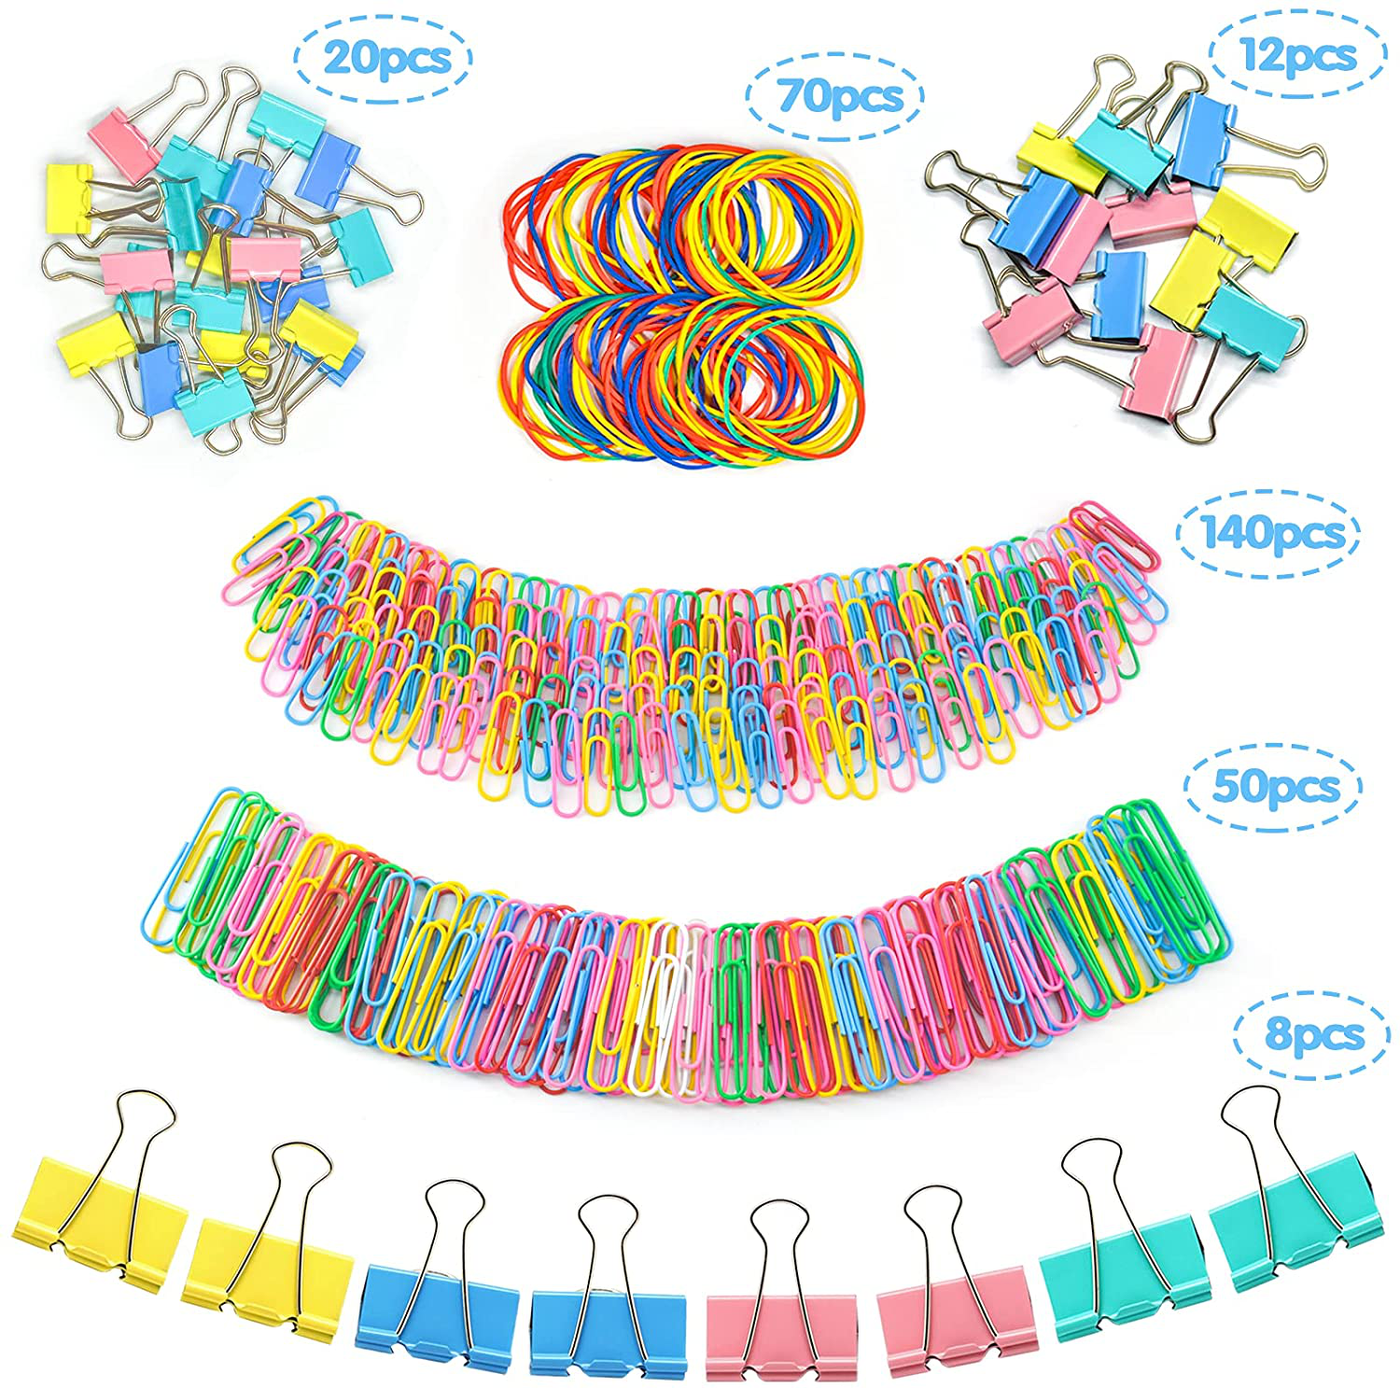 Paper Clips Binder Clips, Colored Office Clips Set - Assorted Sizes Paperclips Paper Clamps Rubber Bands for Office and School Supplies, Document Organizing